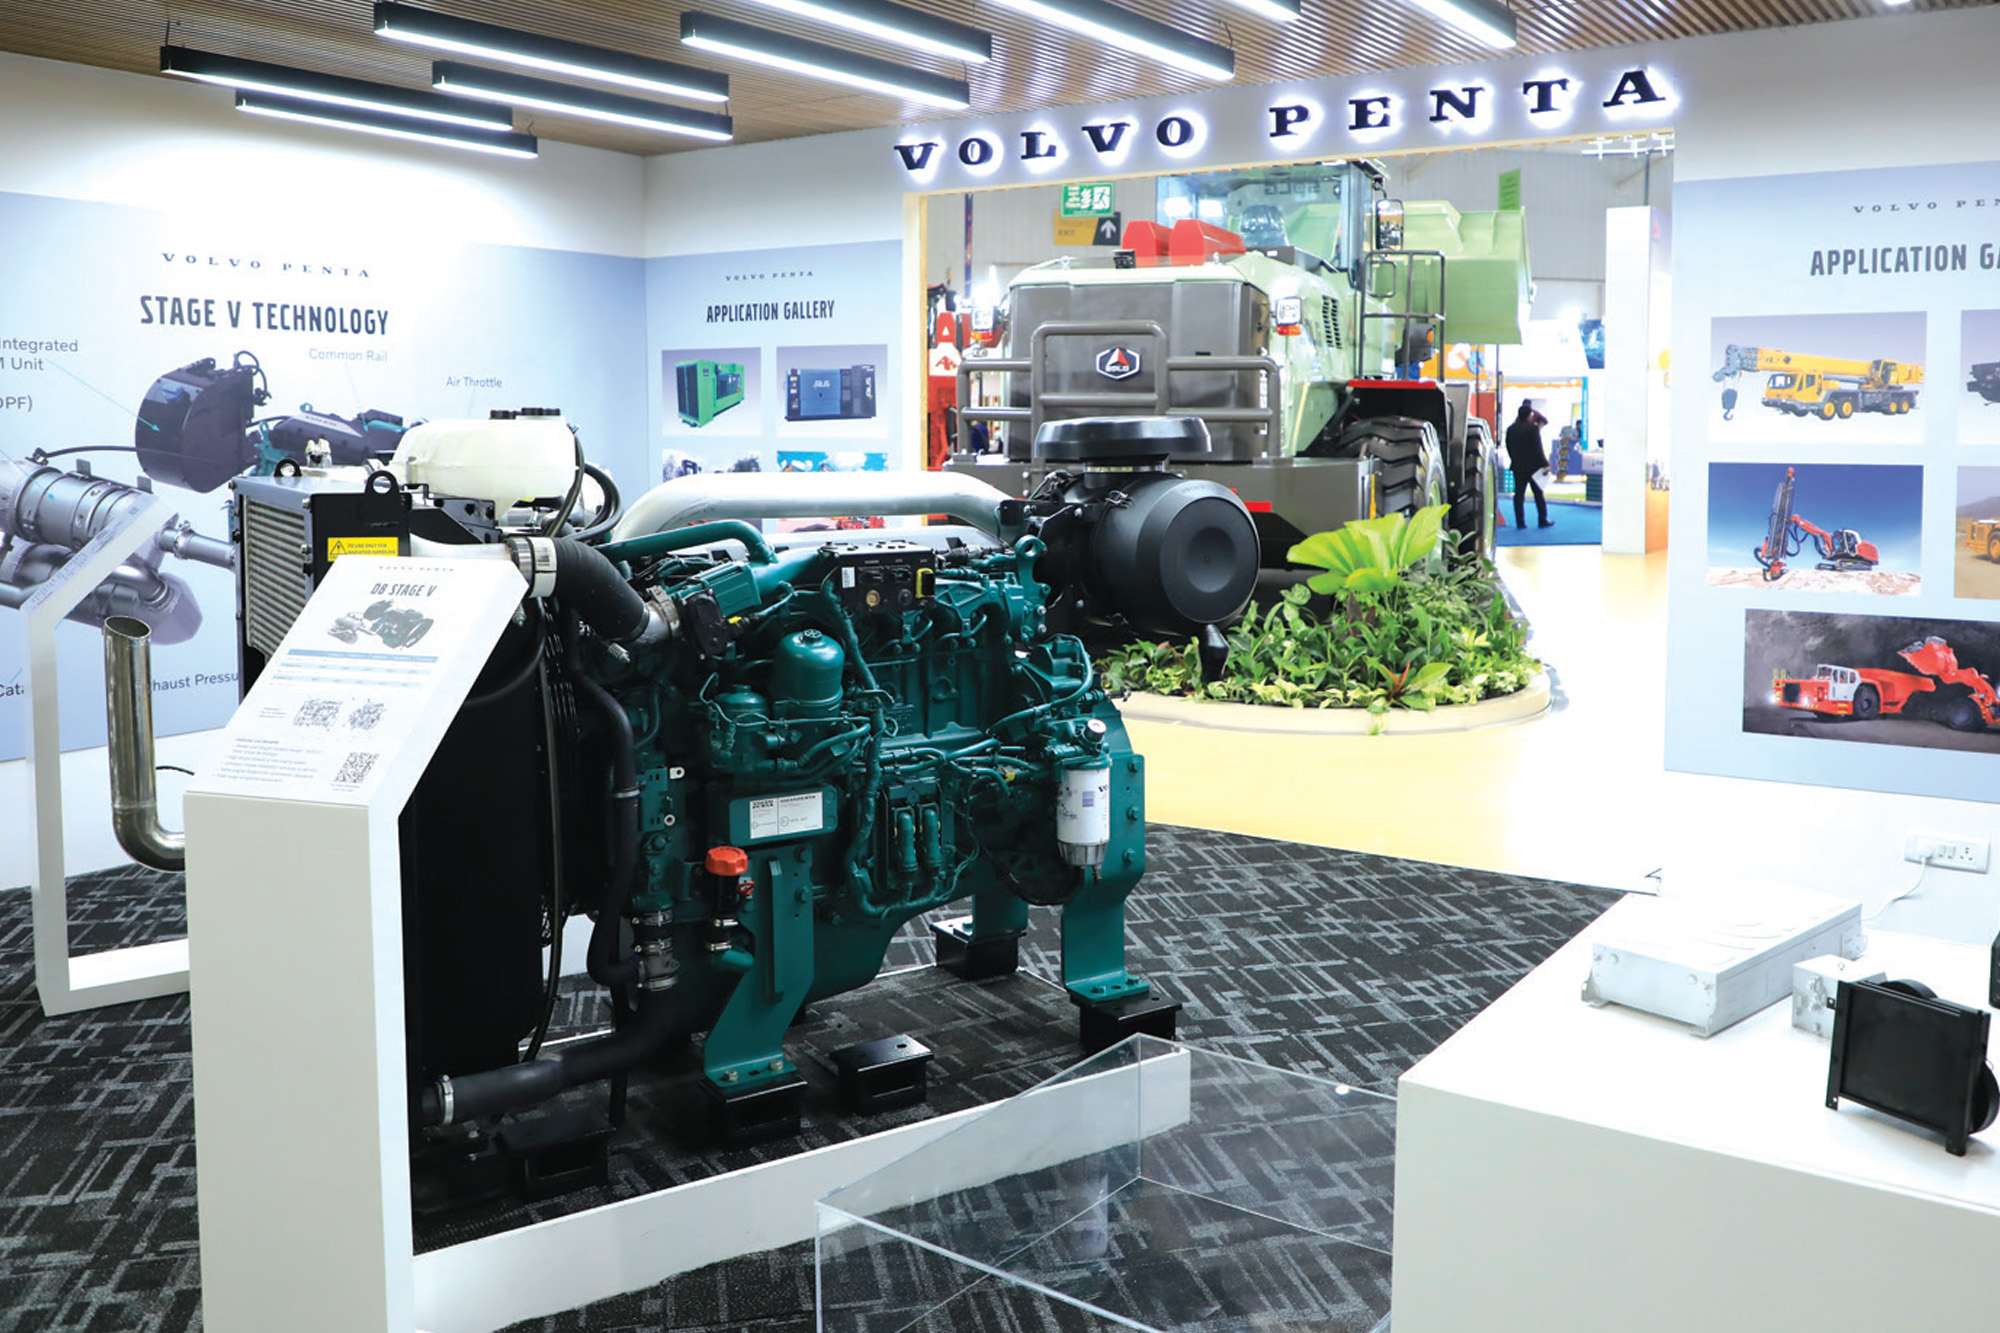 Volvo Penta appears not only as an engine supplier but also as a catalyst changing the very currents of development.